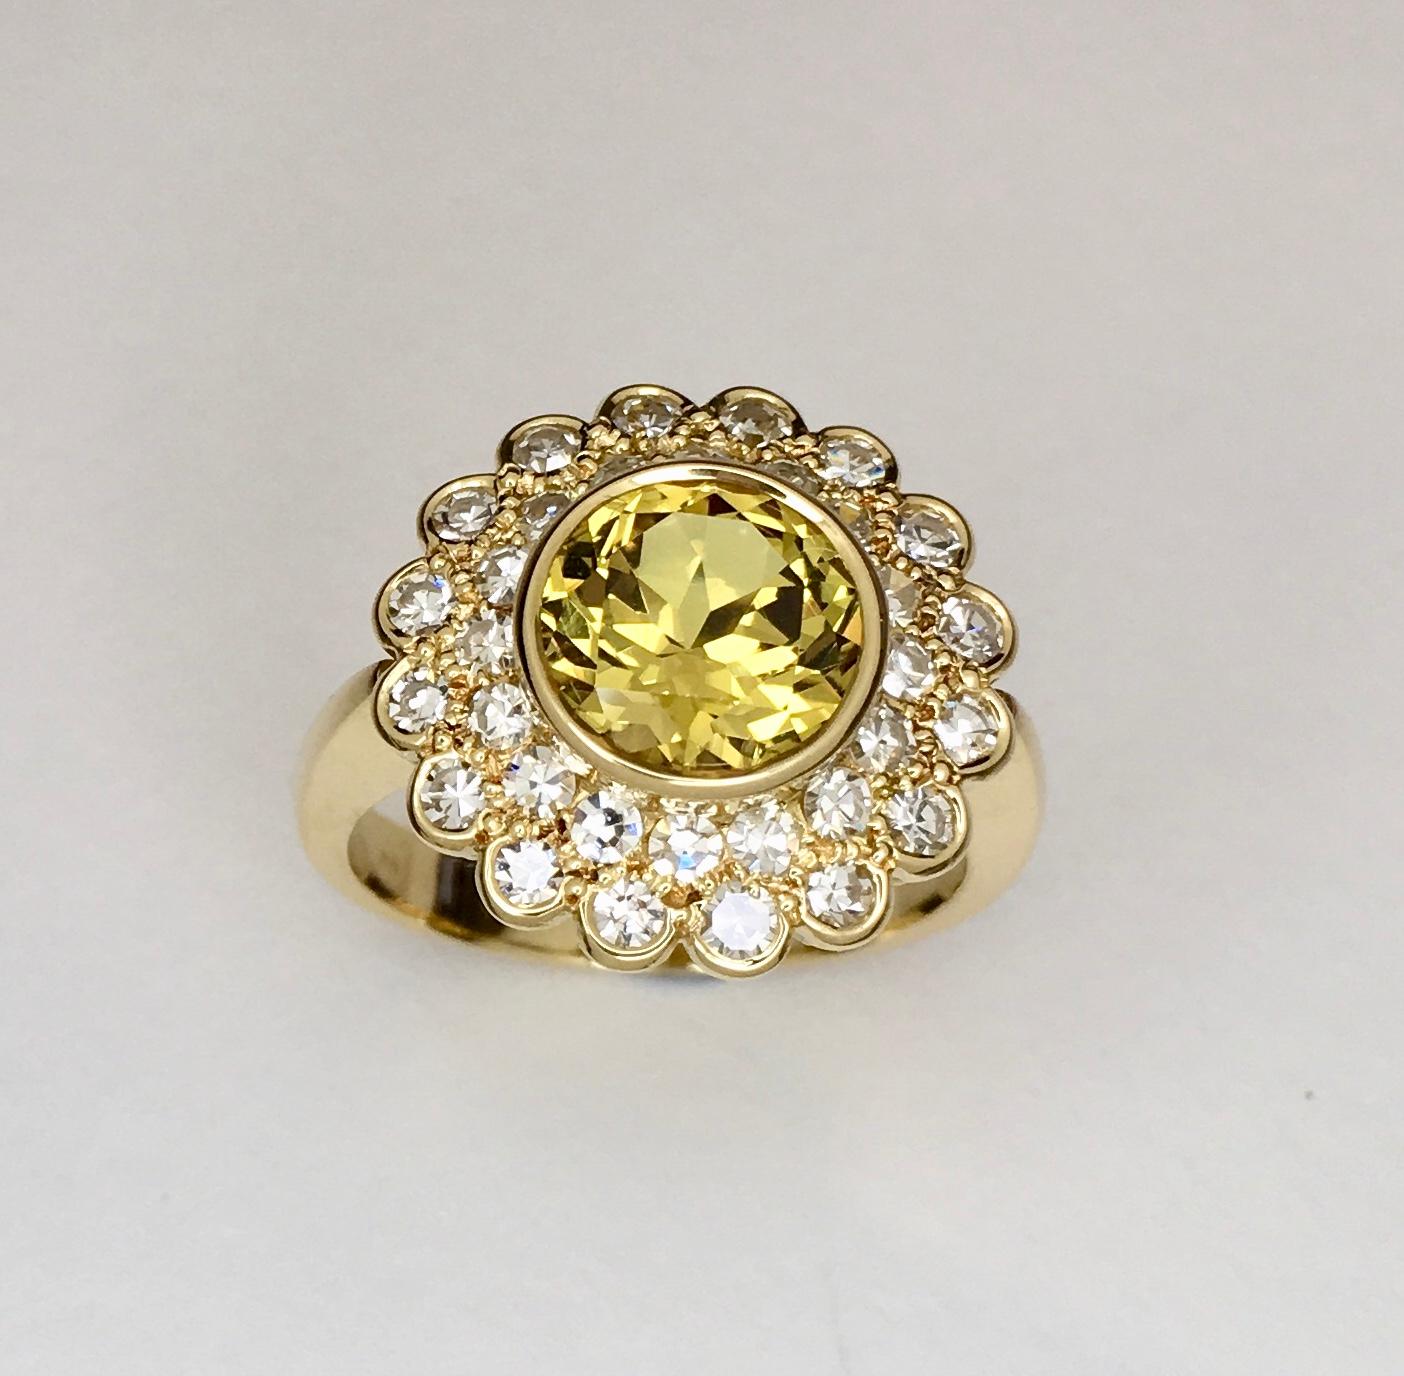 18 Karat Yellow Gold 2.95 Carat Yellow Sapphire Diamond Double Cluster Ring

Stunning Classic design handcrafted in 18kt yellow gold. This is a double rowed diamond cluster ring. Center stone is a bright round Australian yellow sapphire secured in a